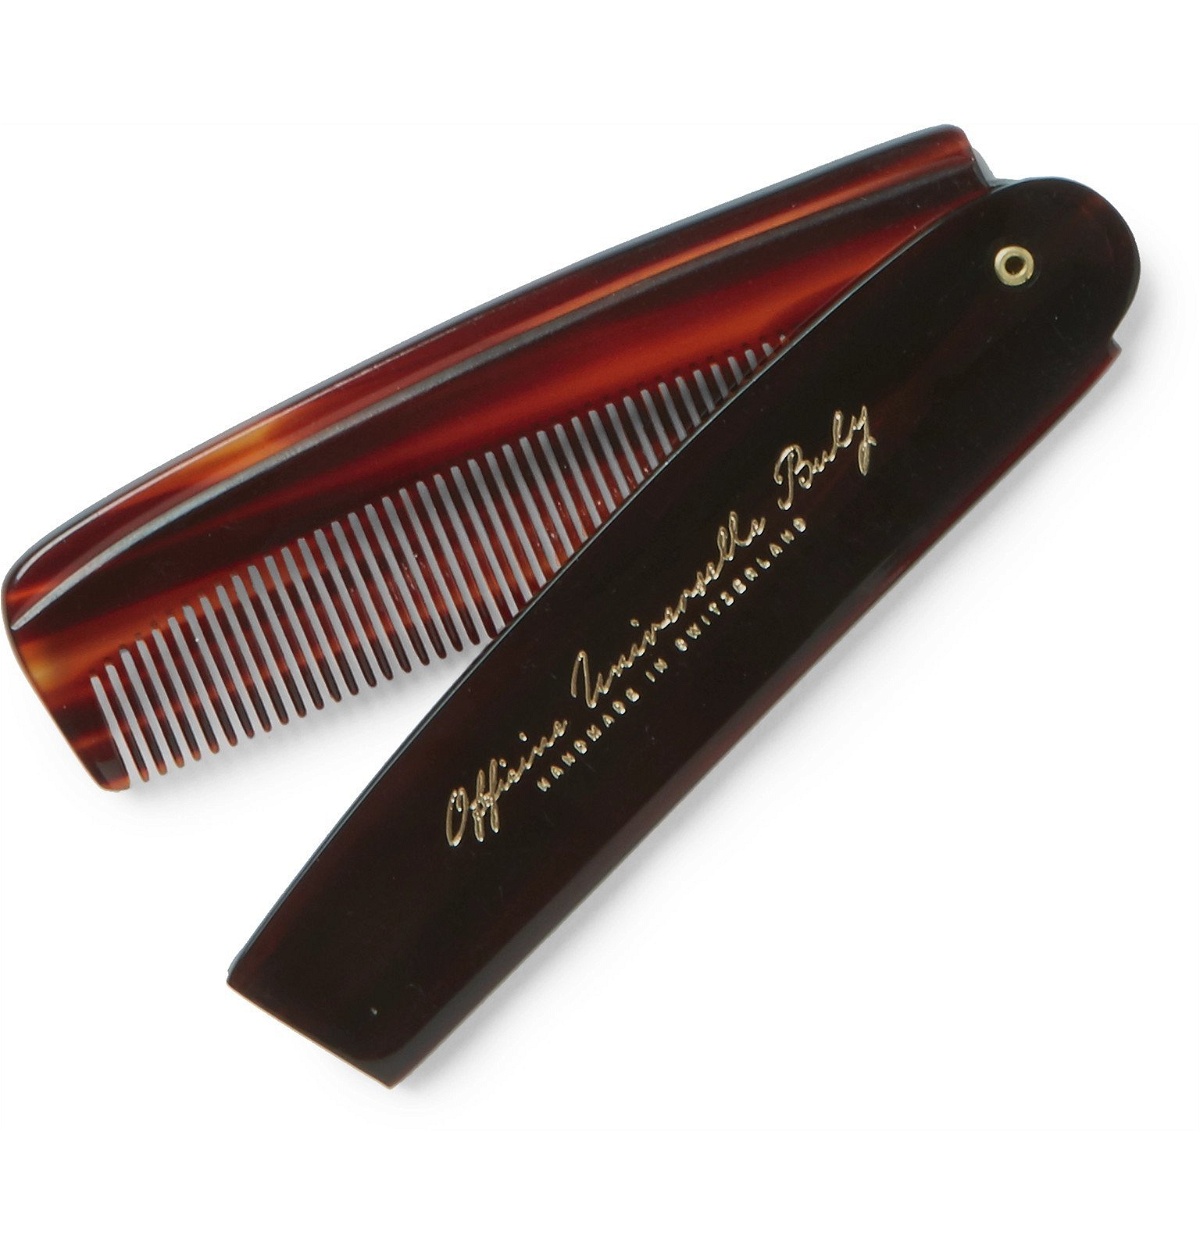 Buly 1803 - Horn-Effect Acetate Folding Comb - Red Buly 1803